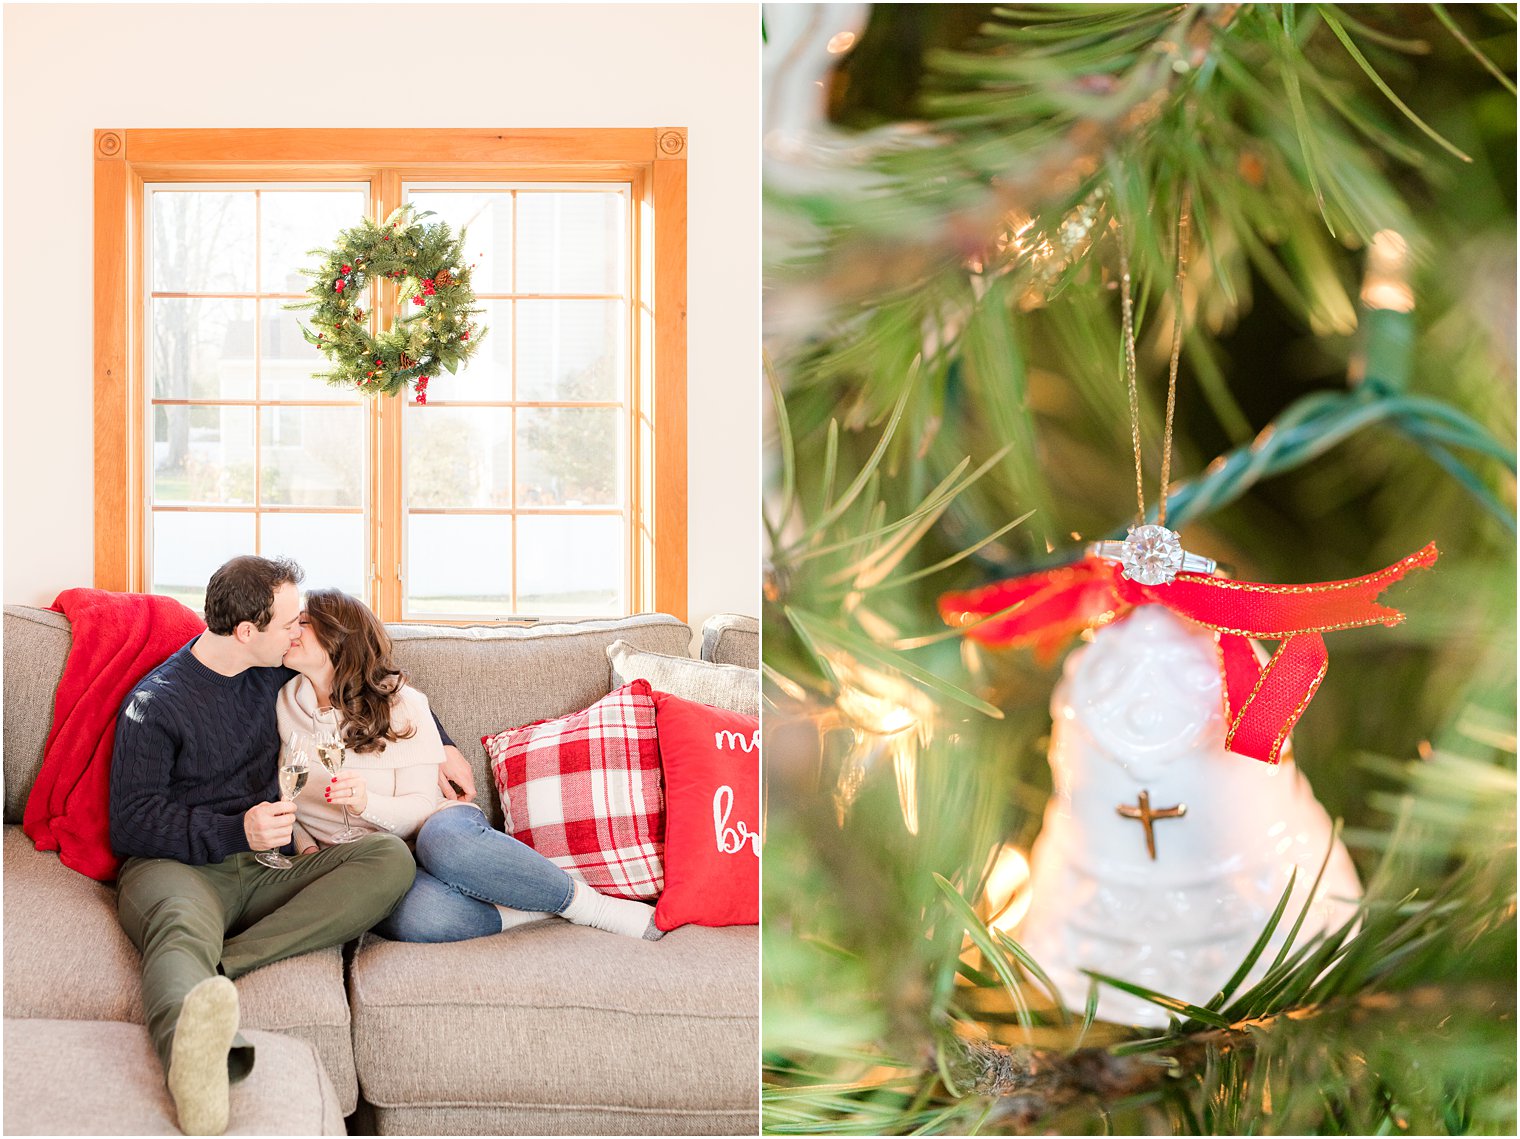 bride and groom sit holding champagne glasses by Christmas wreath during cozy in-home holiday engagement session